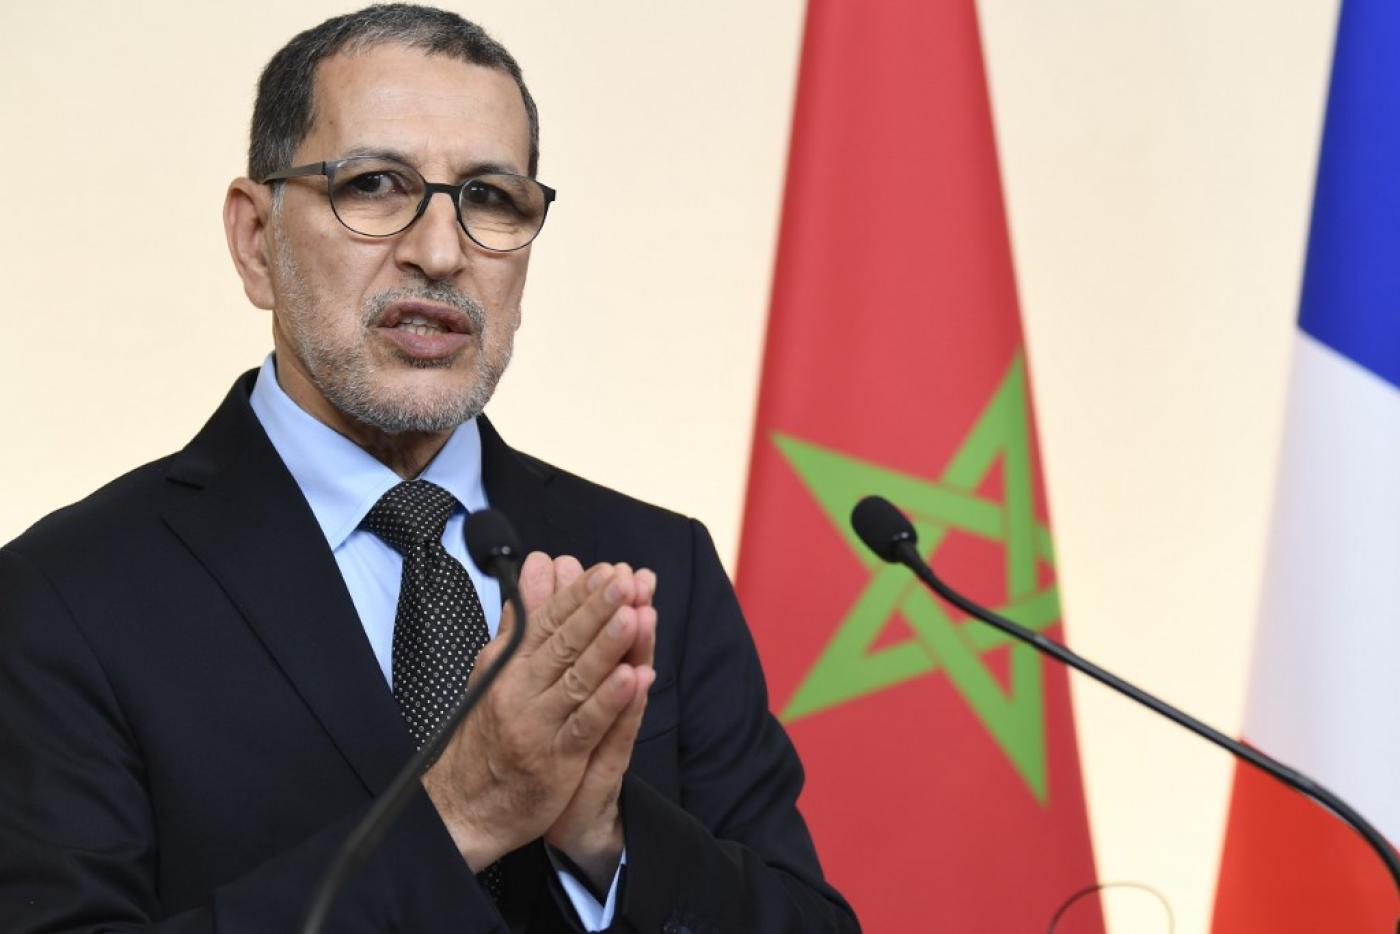 Moroccan Prime Minister Saad Eddine el-Othmani has come under criticism for signing a deal normalising relations with Israel (AFP)